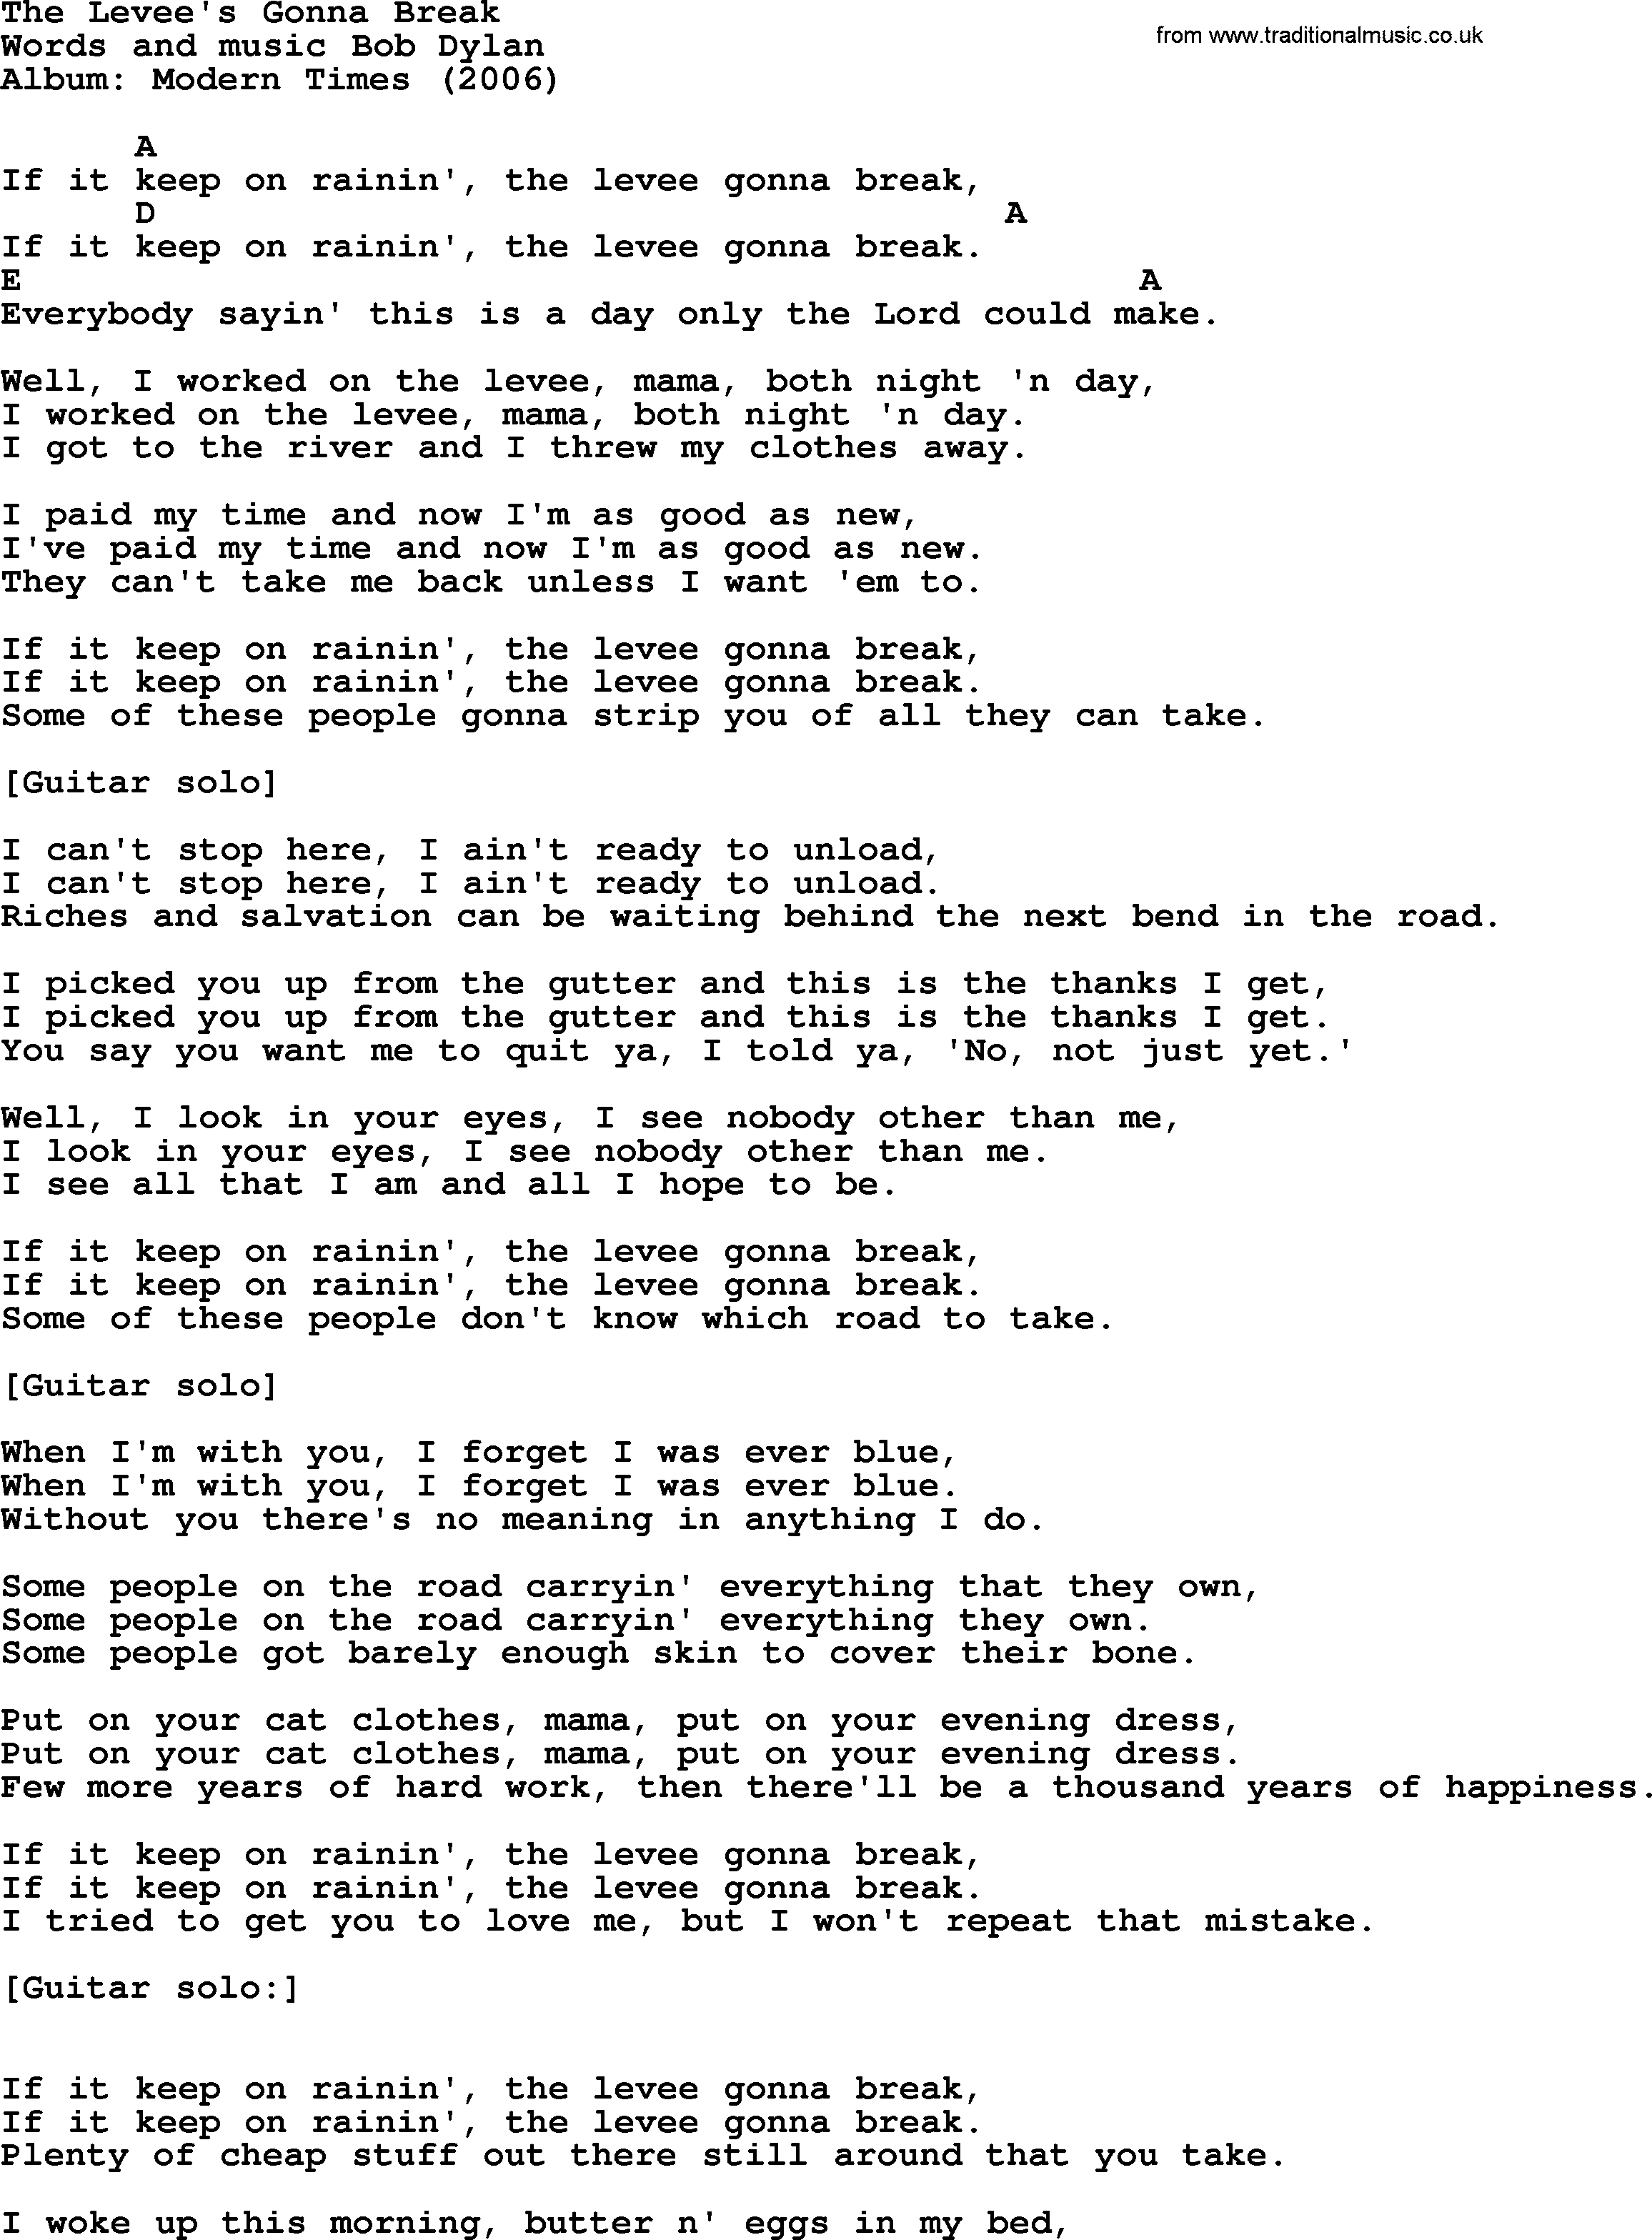 Bob Dylan song, lyrics with chords - The Levee's Gonna Break